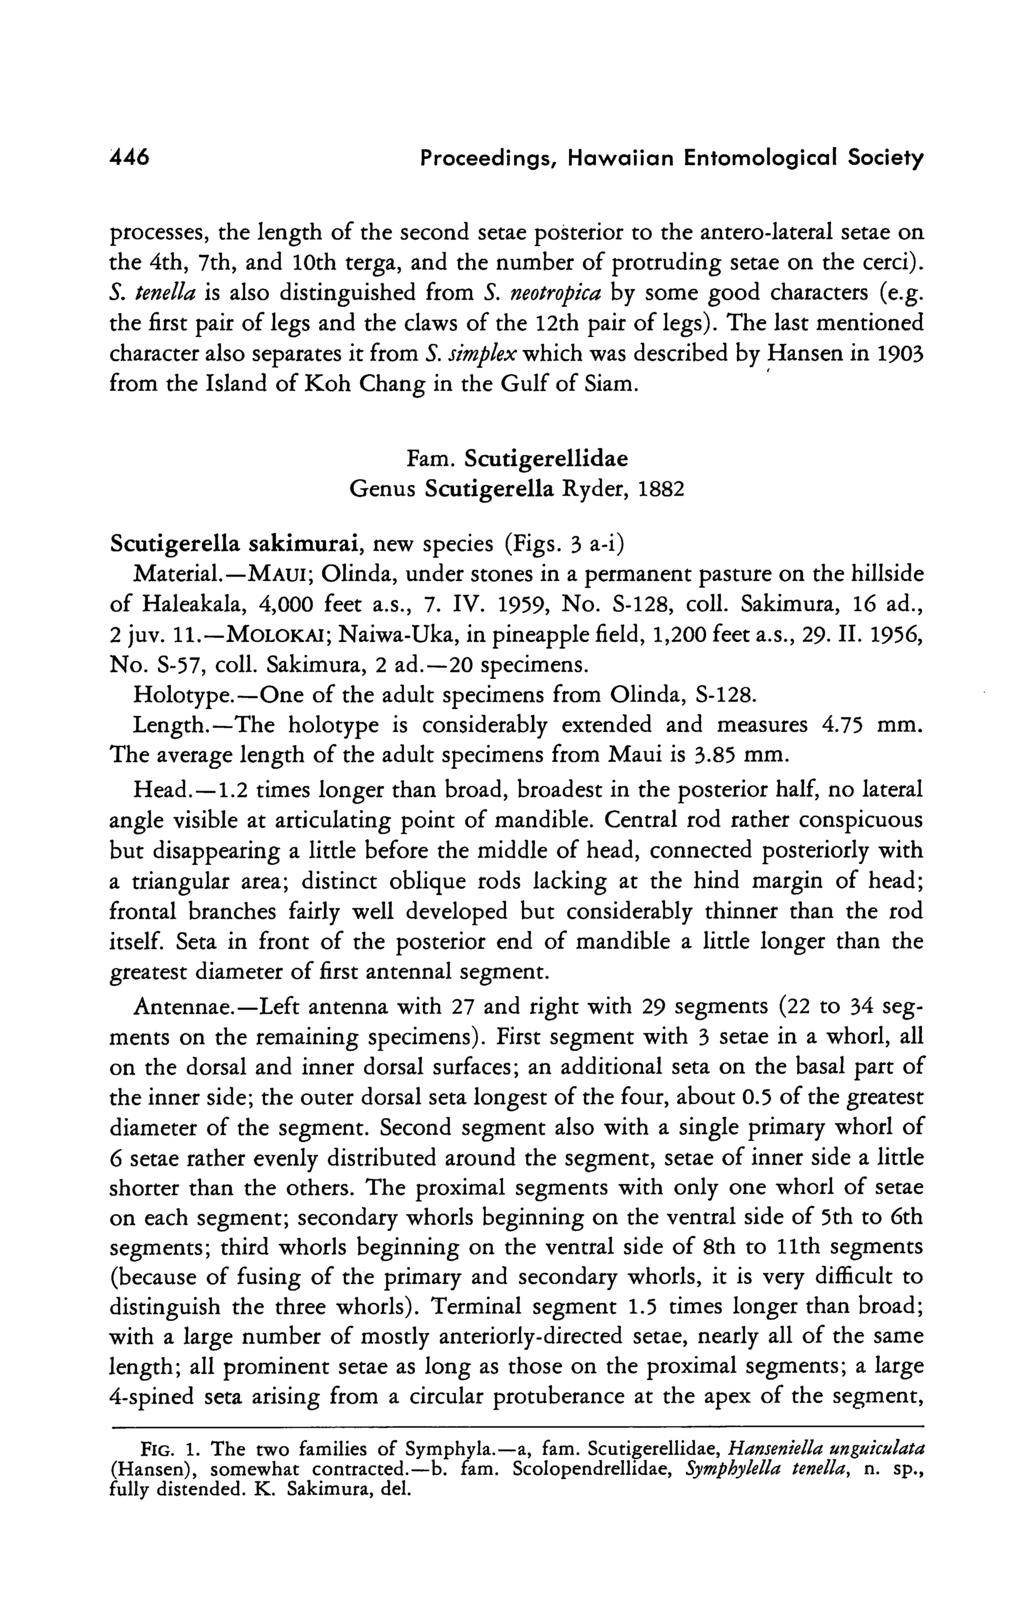 446 Proceedings, Hawaiian Entomological Society processes, the length of the second setae posterior to the antero-lateral setae on the 4th, 7th, and 10th terga, and the number of protruding setae on